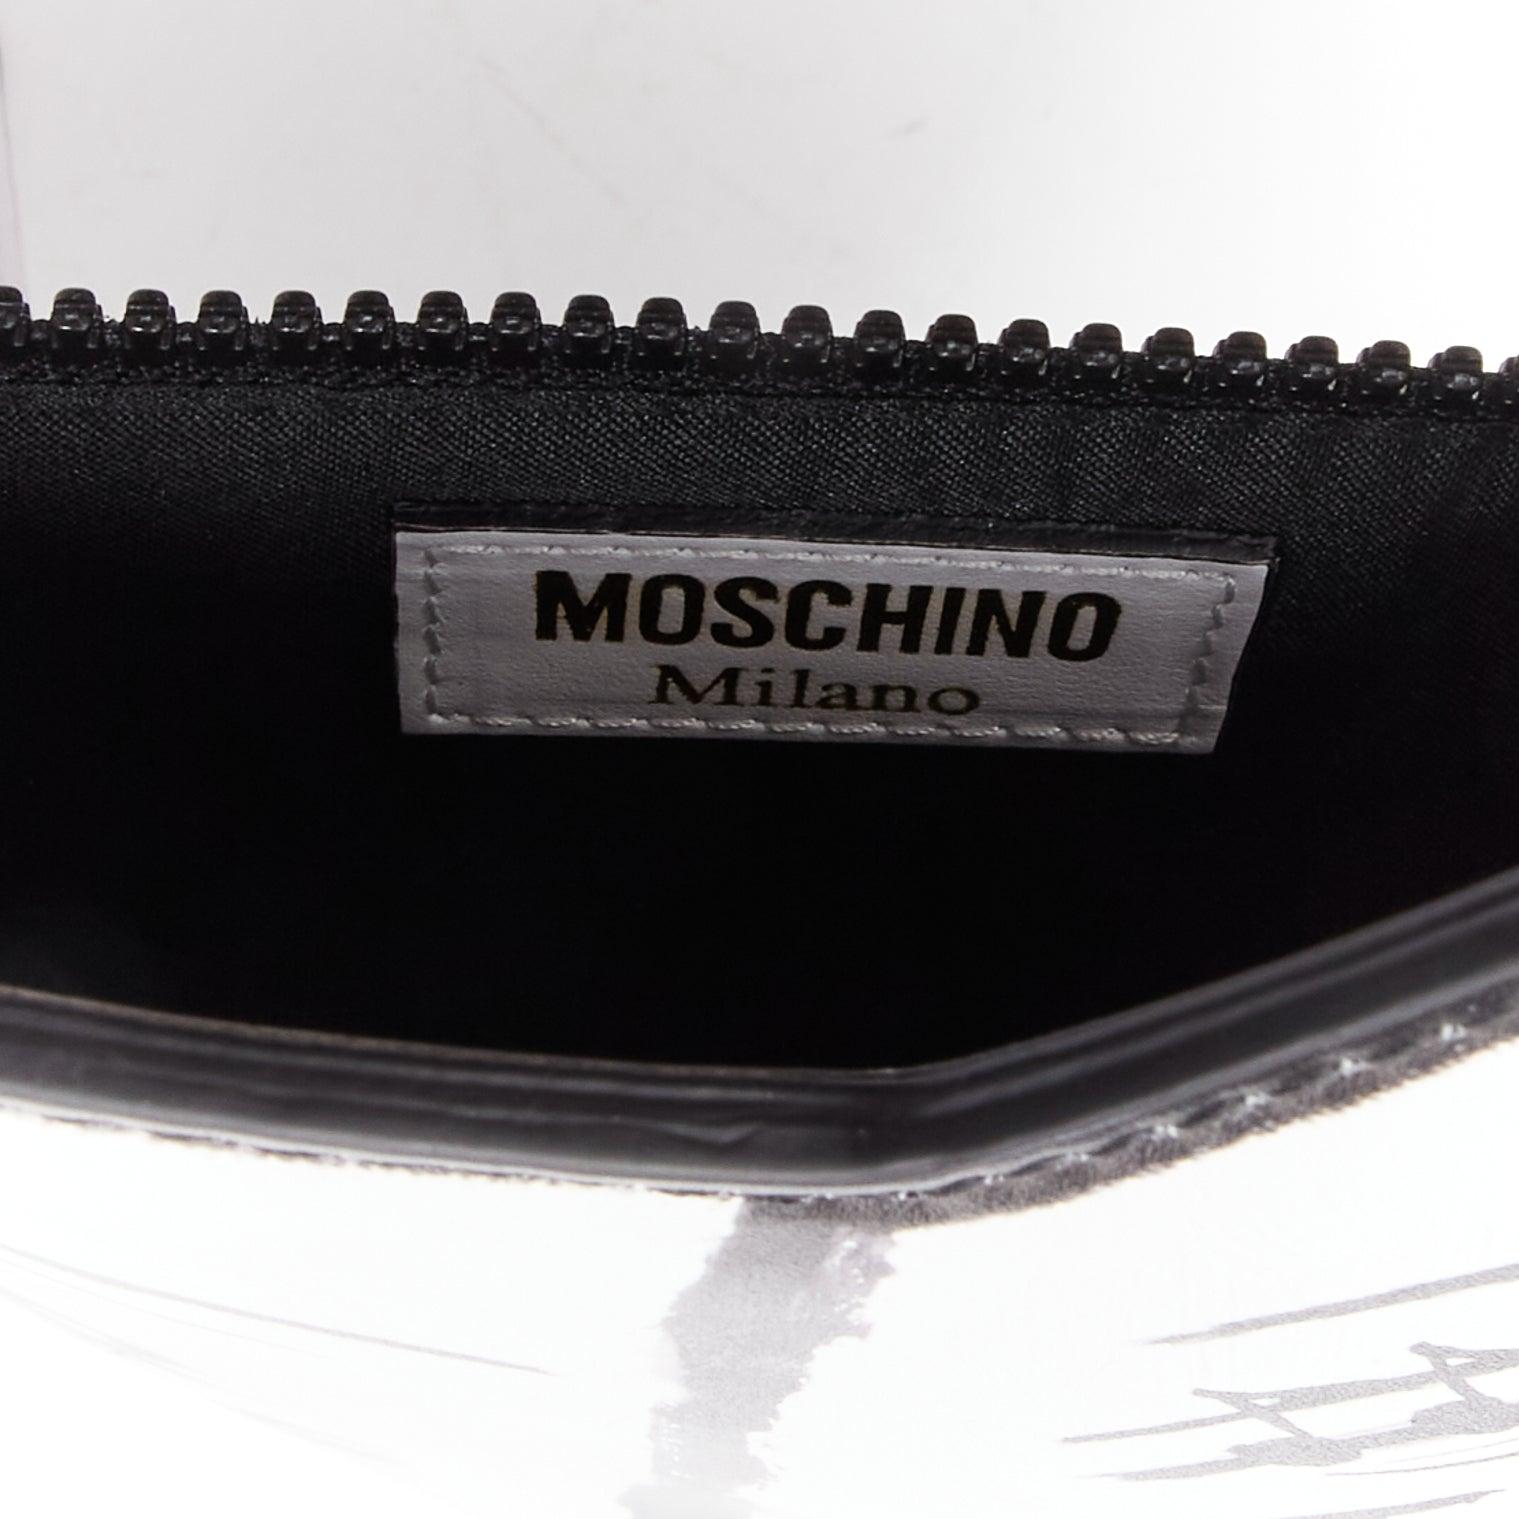 MOSCHINO COUTURE 2020 Runway Picasso Musical Note Score white leather clutch bag 3